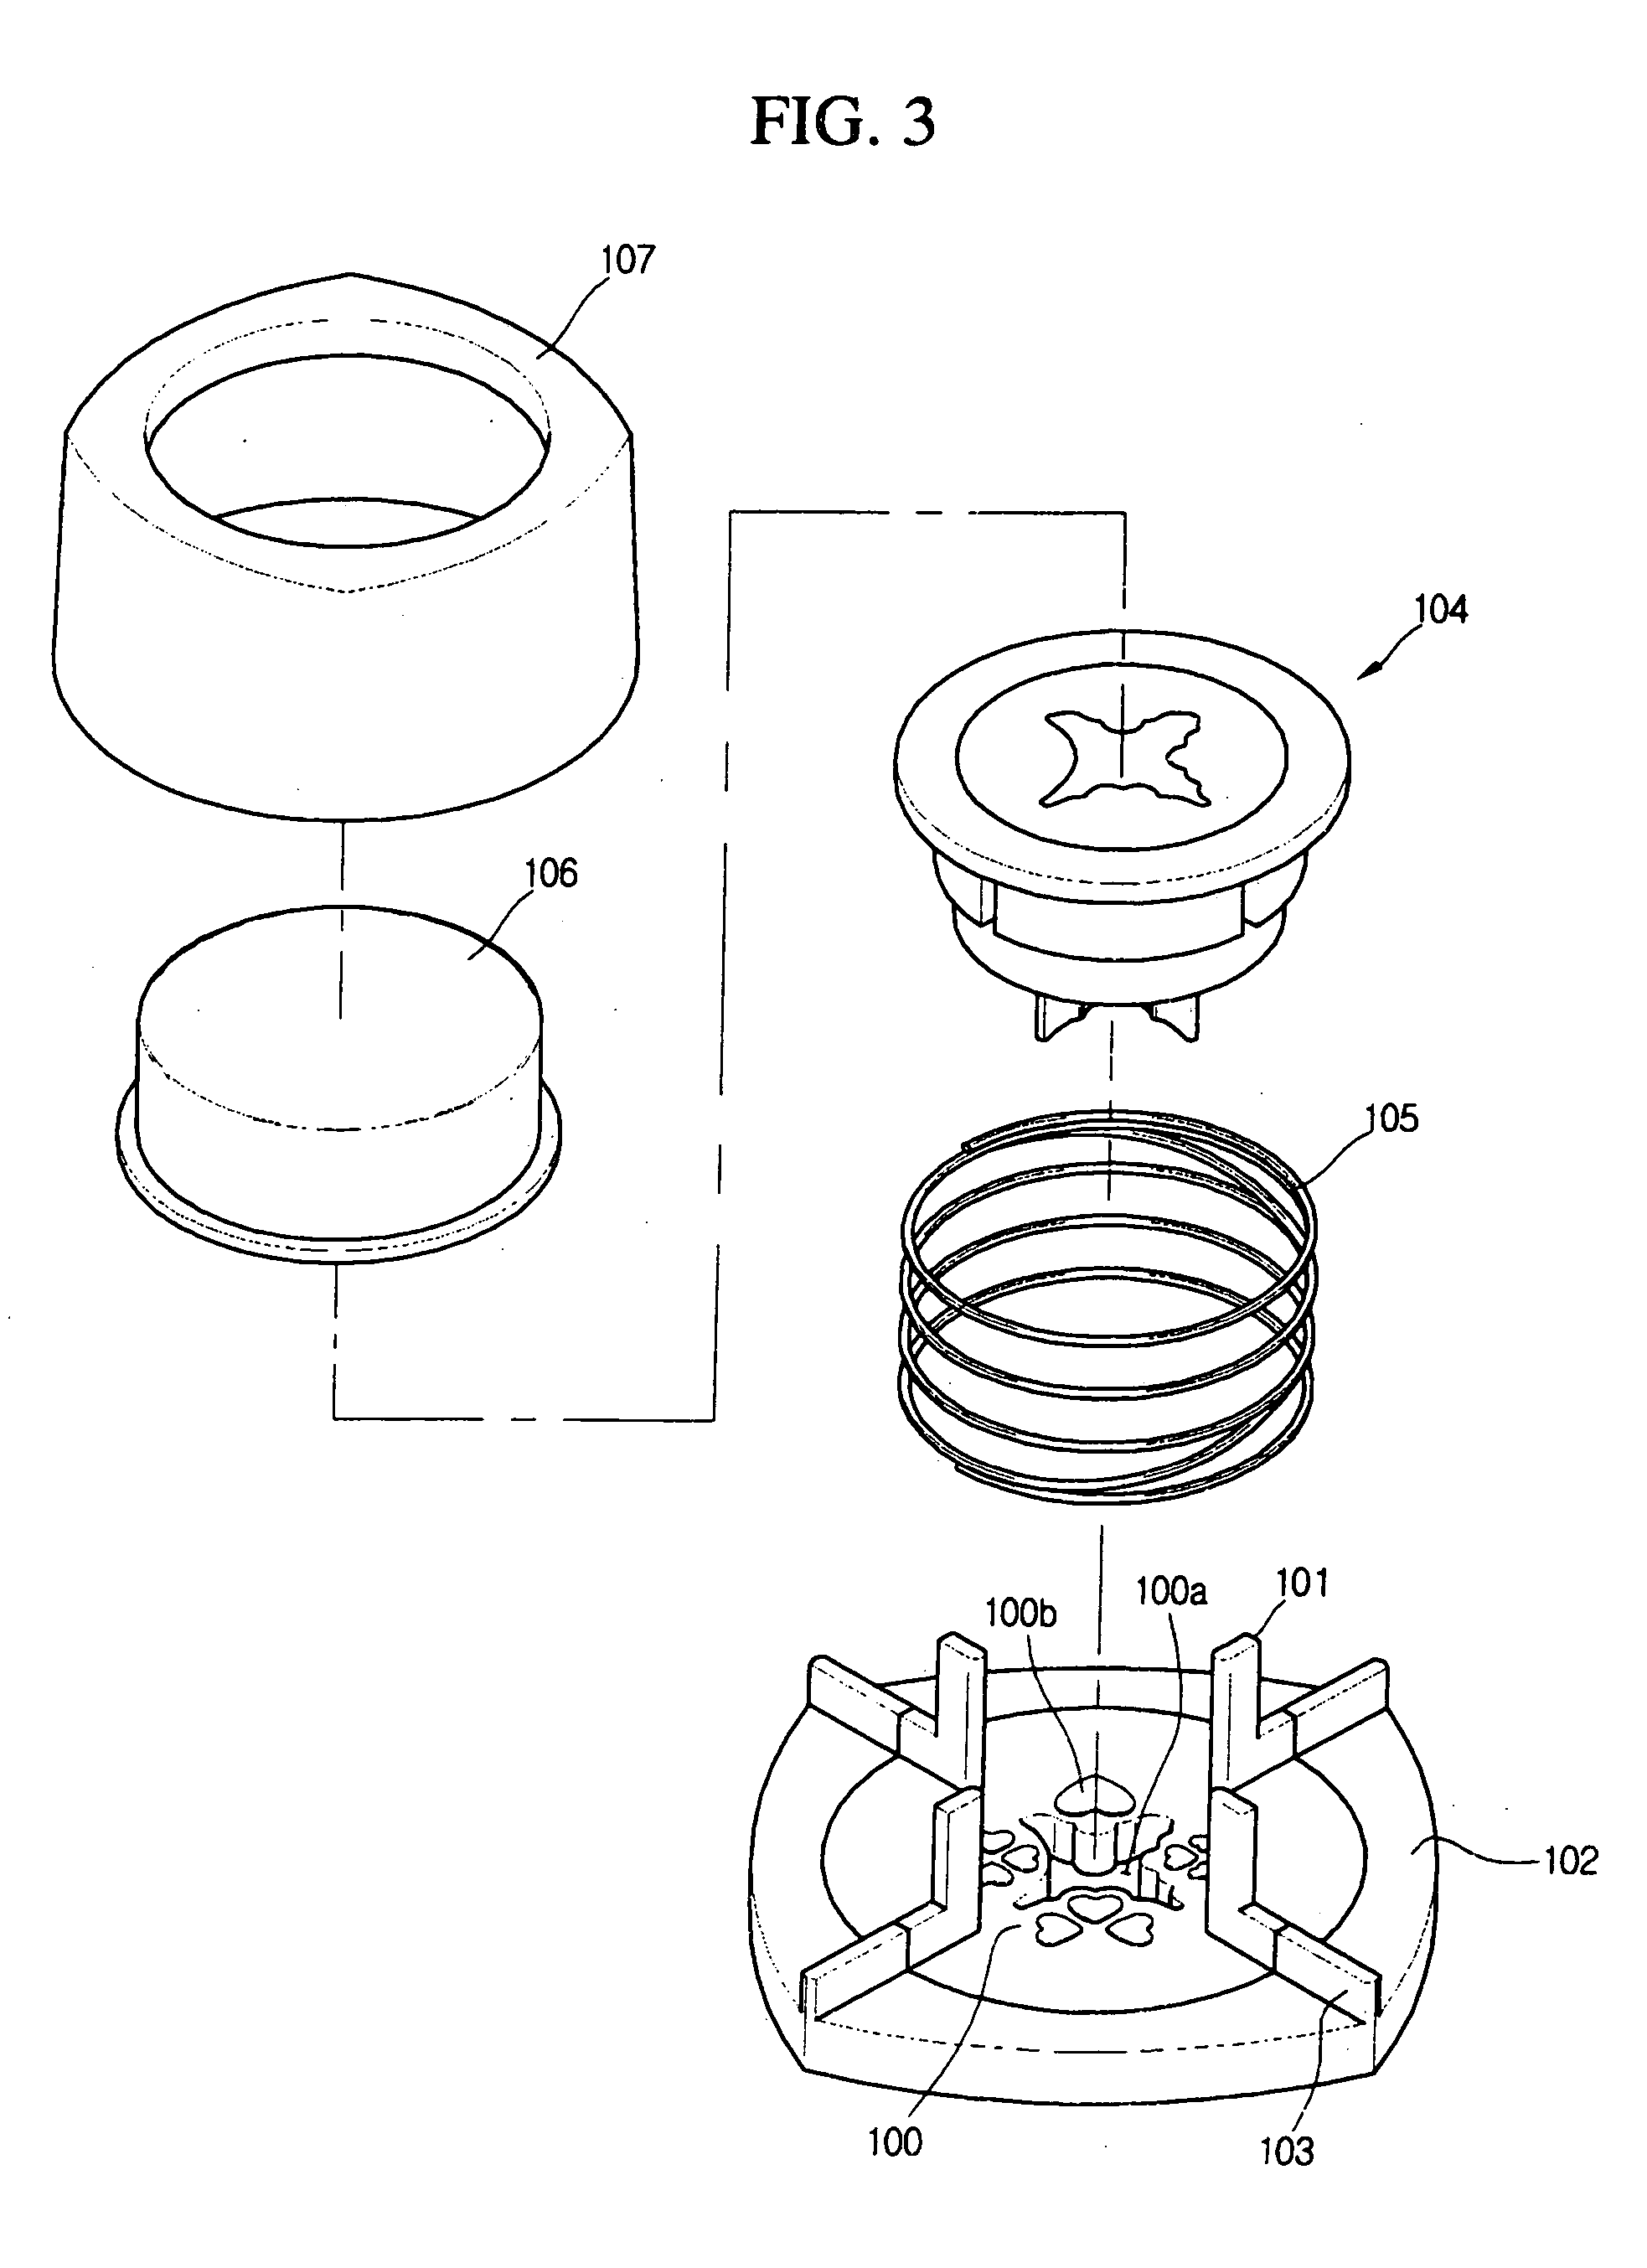 Punch capable of punching an object at four directions